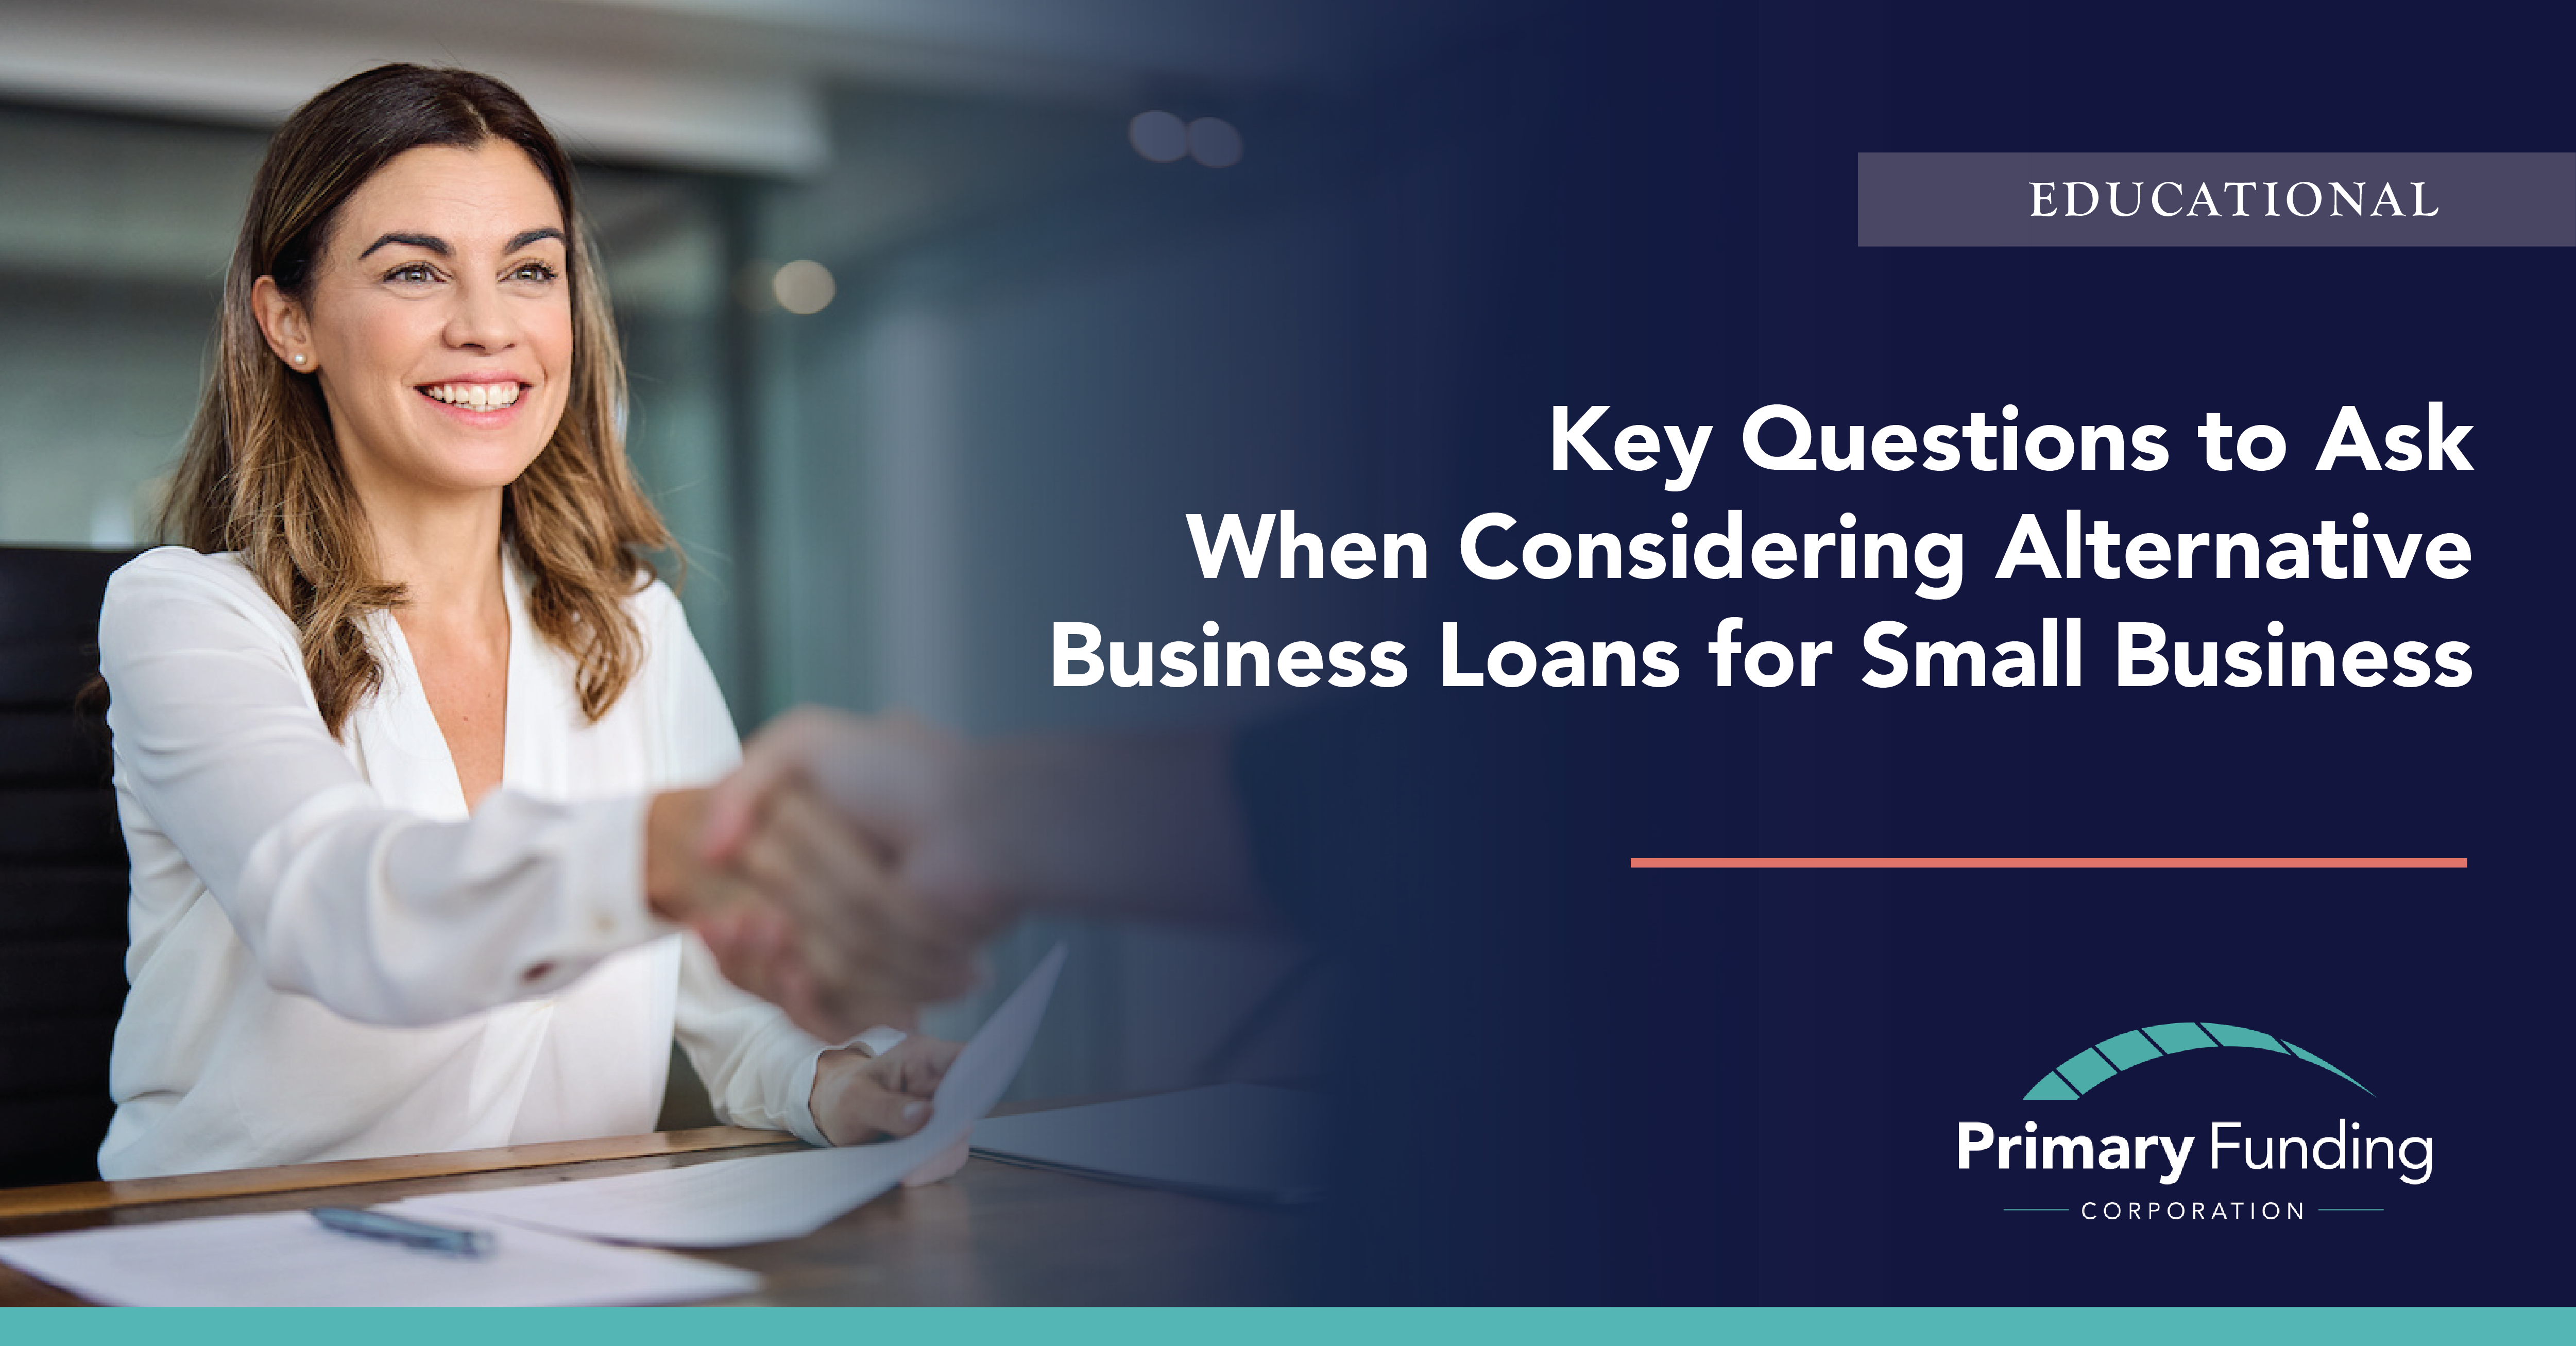 Key Questions to Ask When Considering Alternative Business Loans for Small Business post image